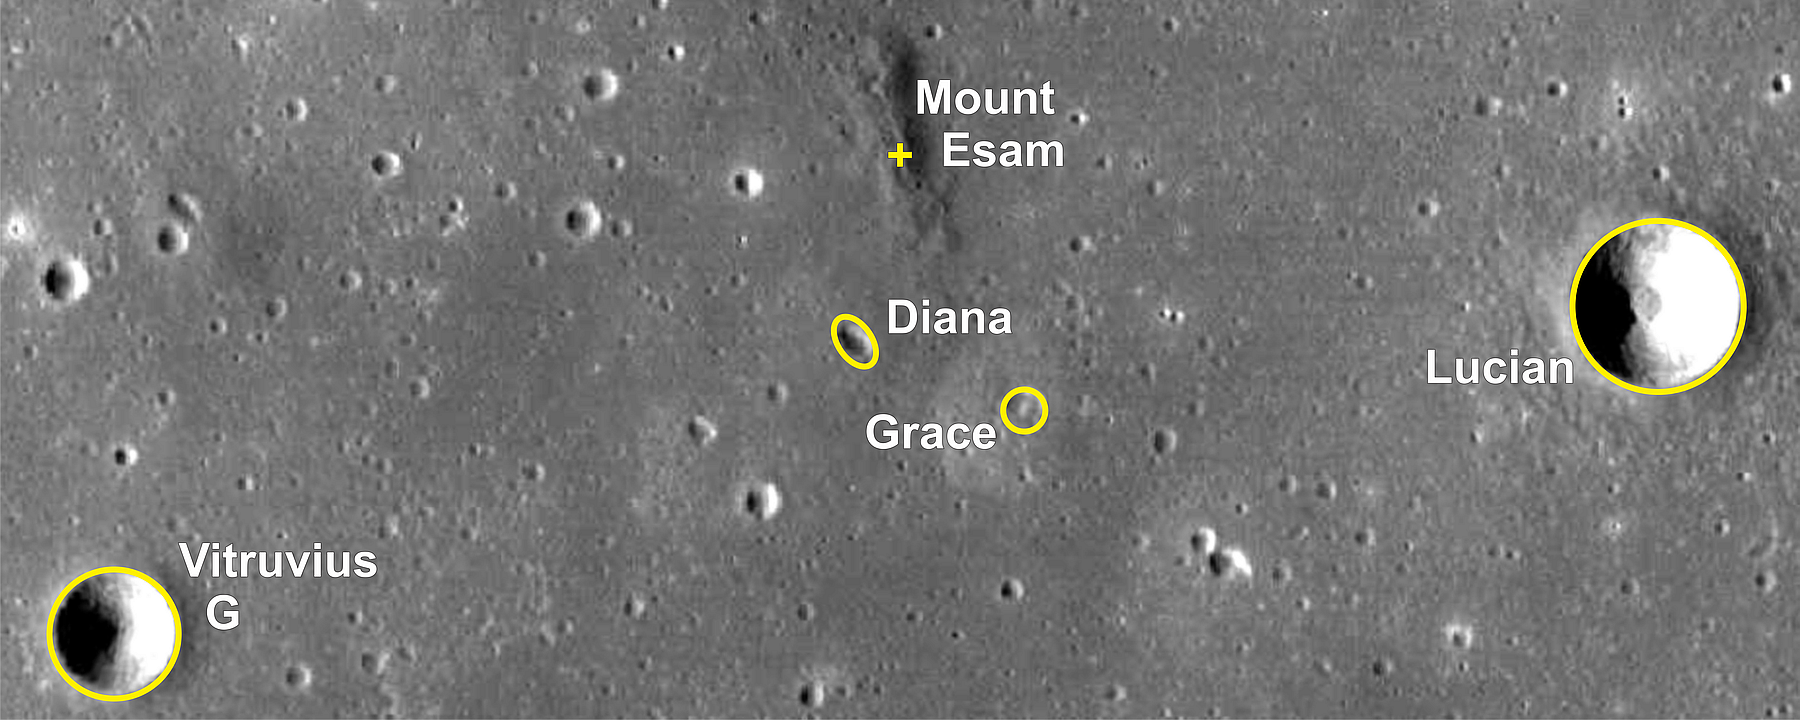 Grace and Diana – Princess Craters on the Moon (Photomap)